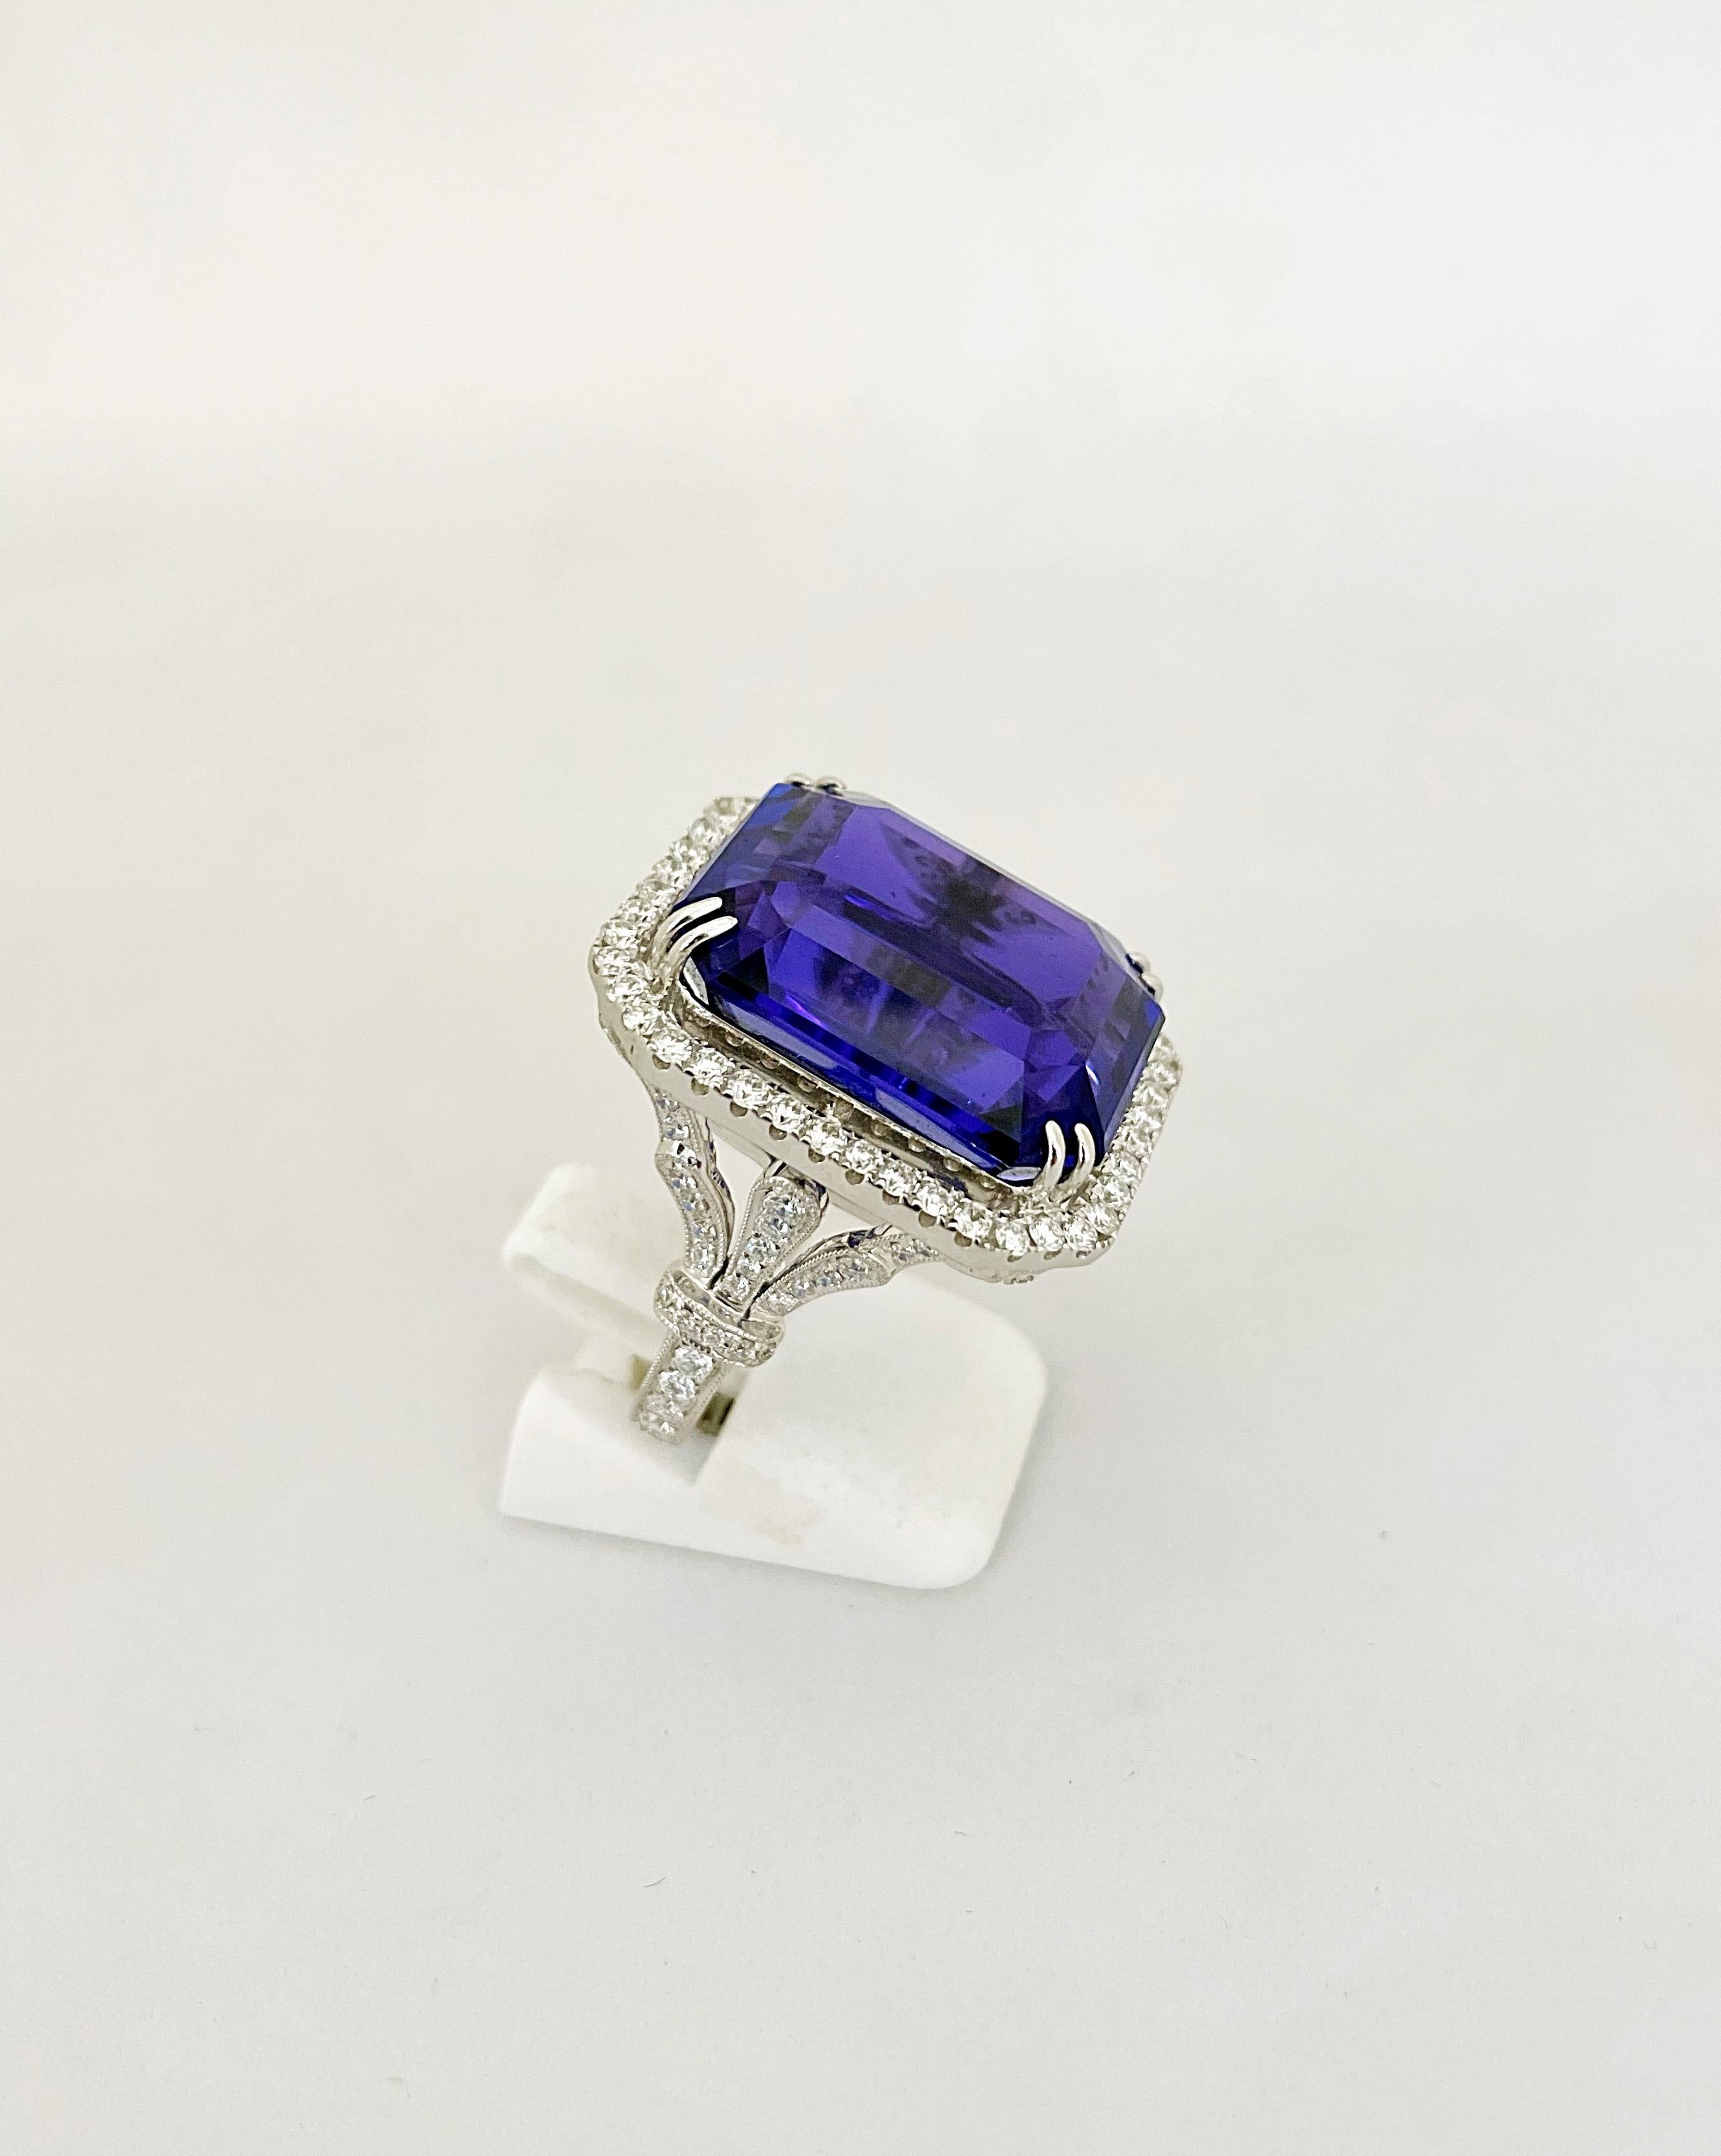 Cellini Jewelers 18KT Gold, 32.27 Carat Tanzanite Ring with 1.45 Carat Diamonds For Sale 1